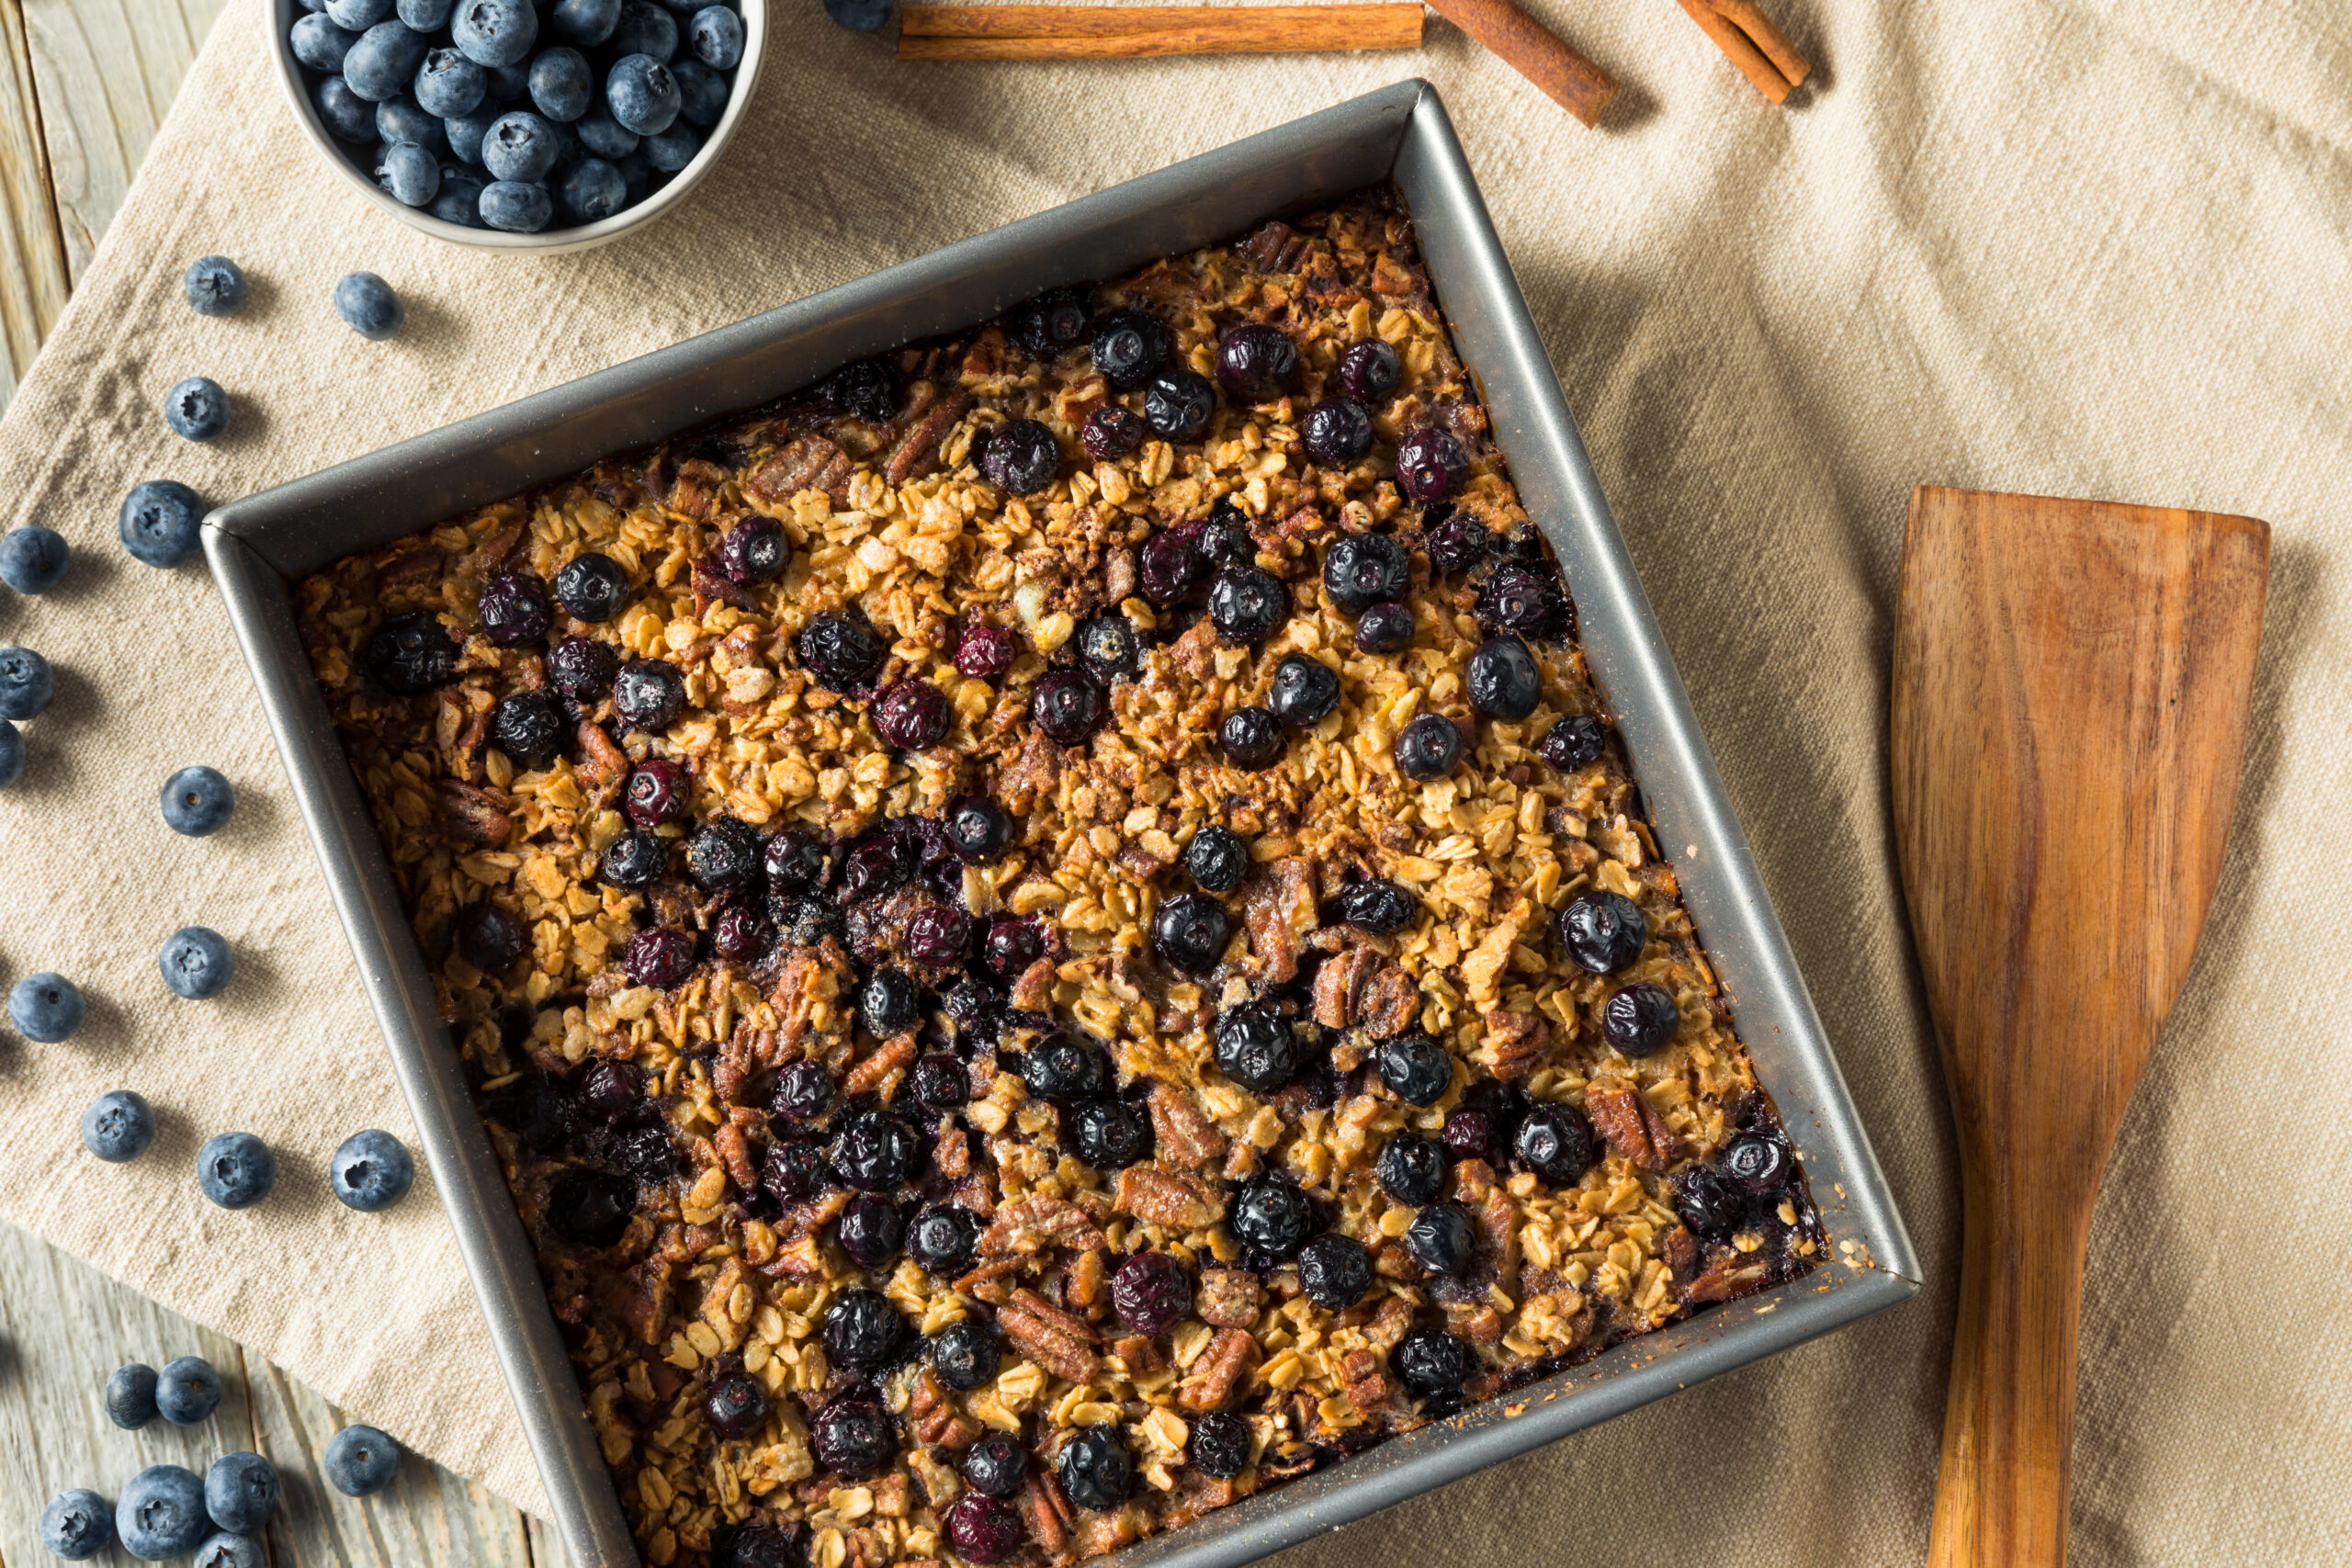 Blueberry, Pineapple & Pecan Baked Oatmeal 